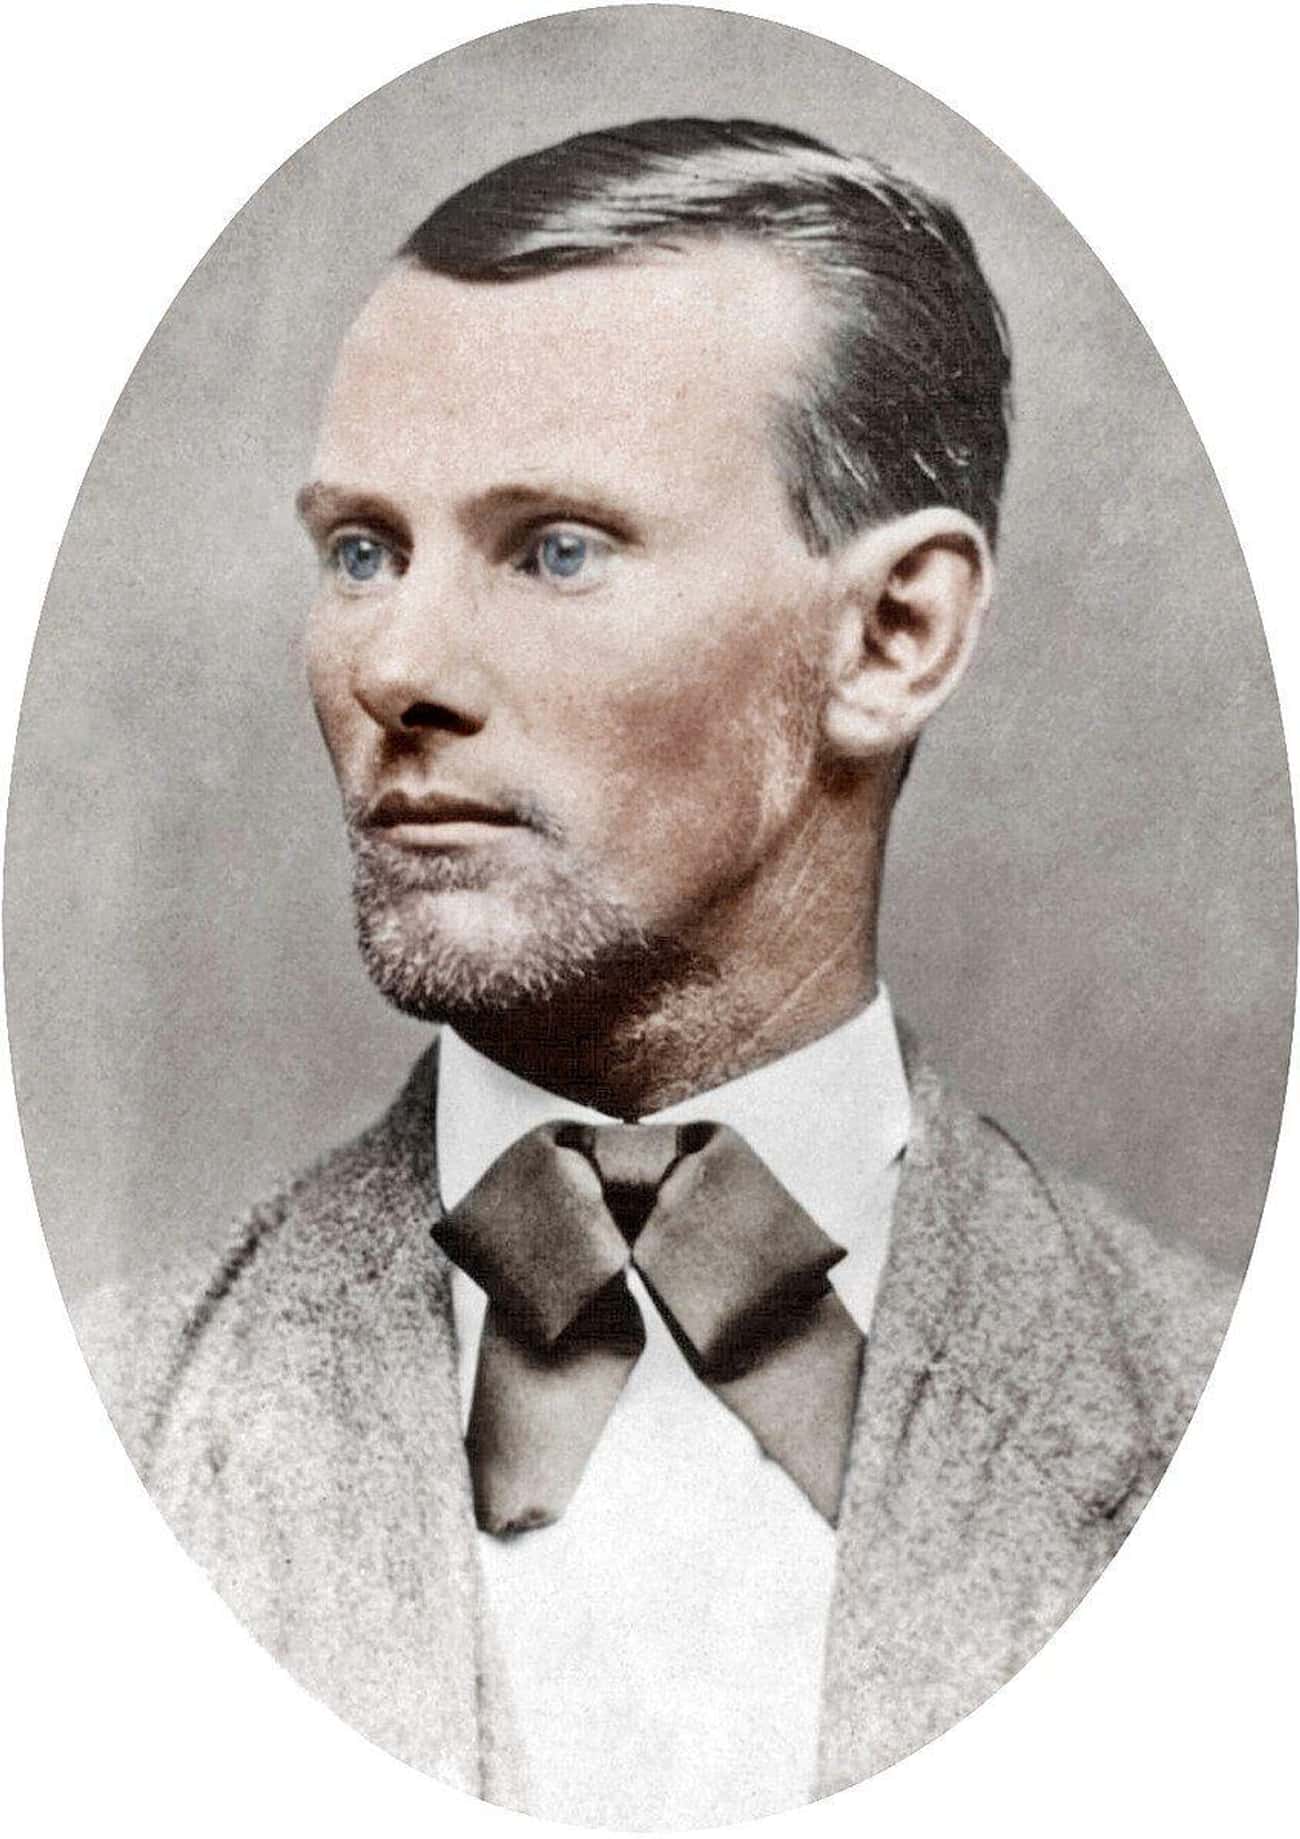 Jesse James Got The Nickname 'Dingus' After Yelling 'Ding It!' When His Finger Was Blown Off